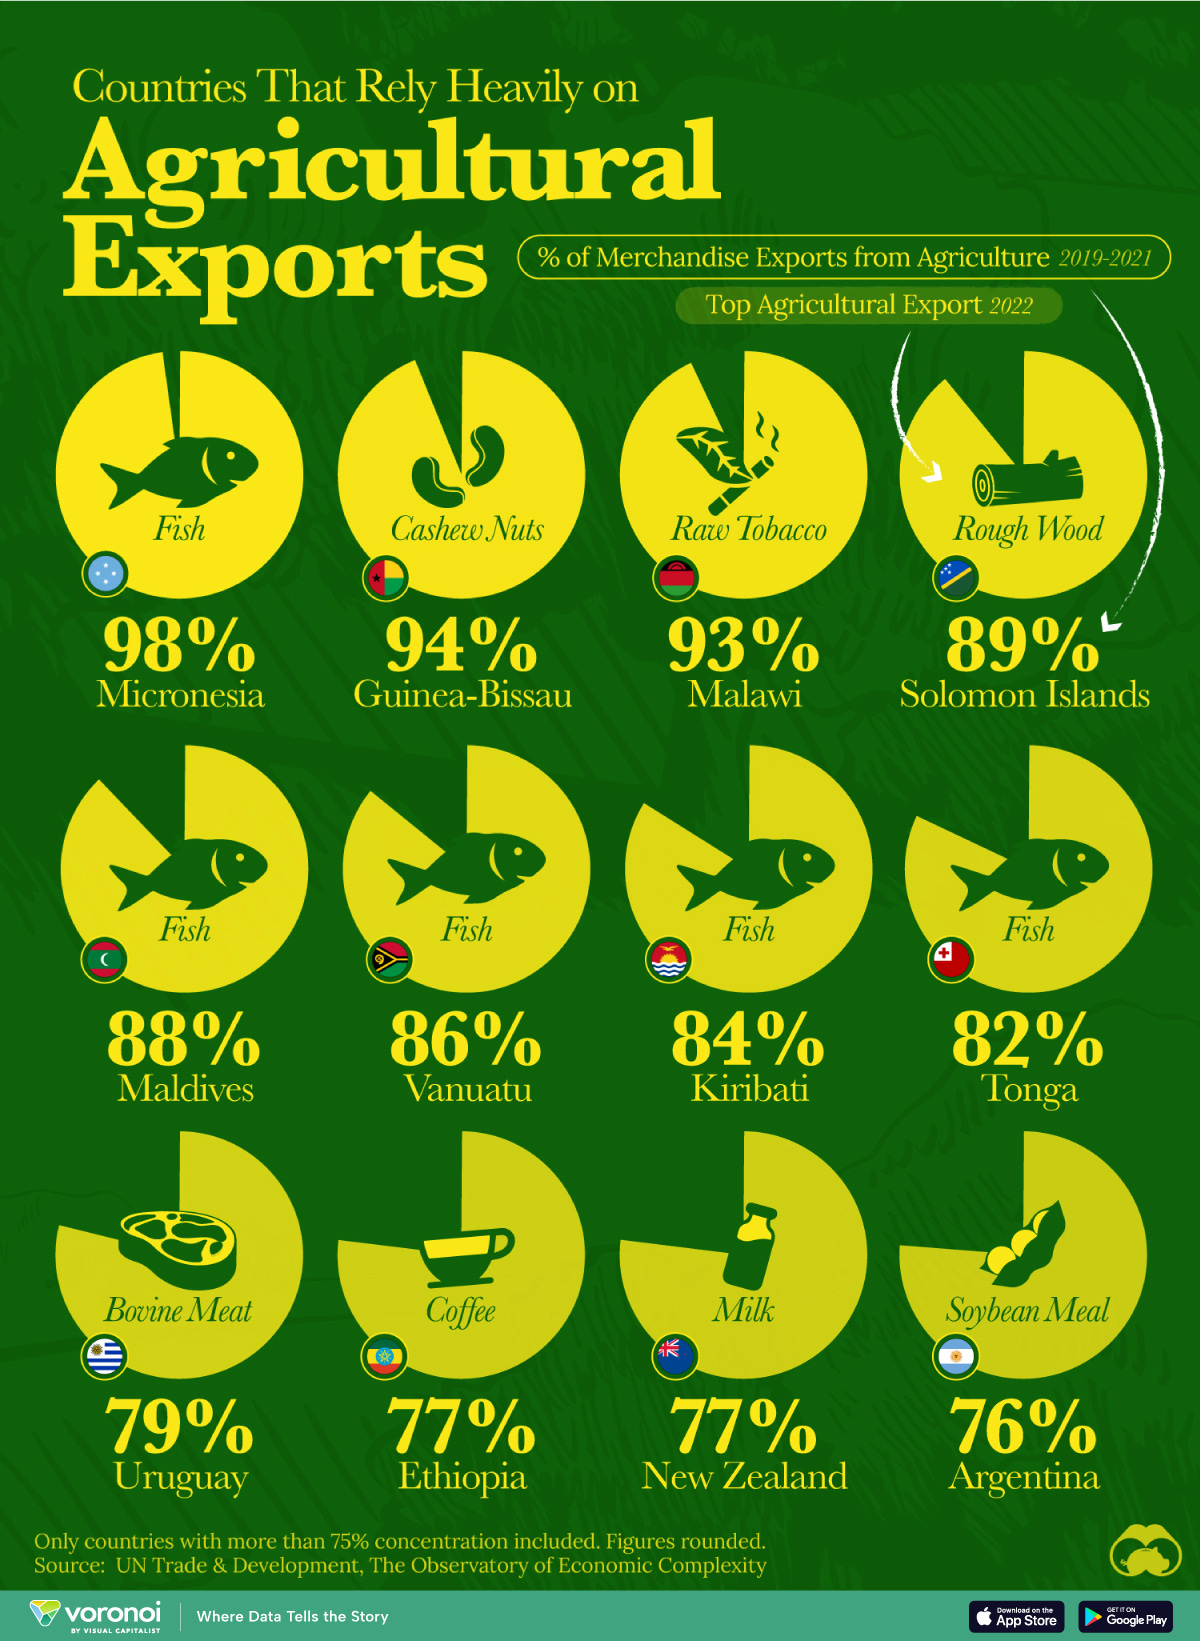 A chart of countries whose agricultural products make up more than 75% of their exports, along with their top agricultural export.